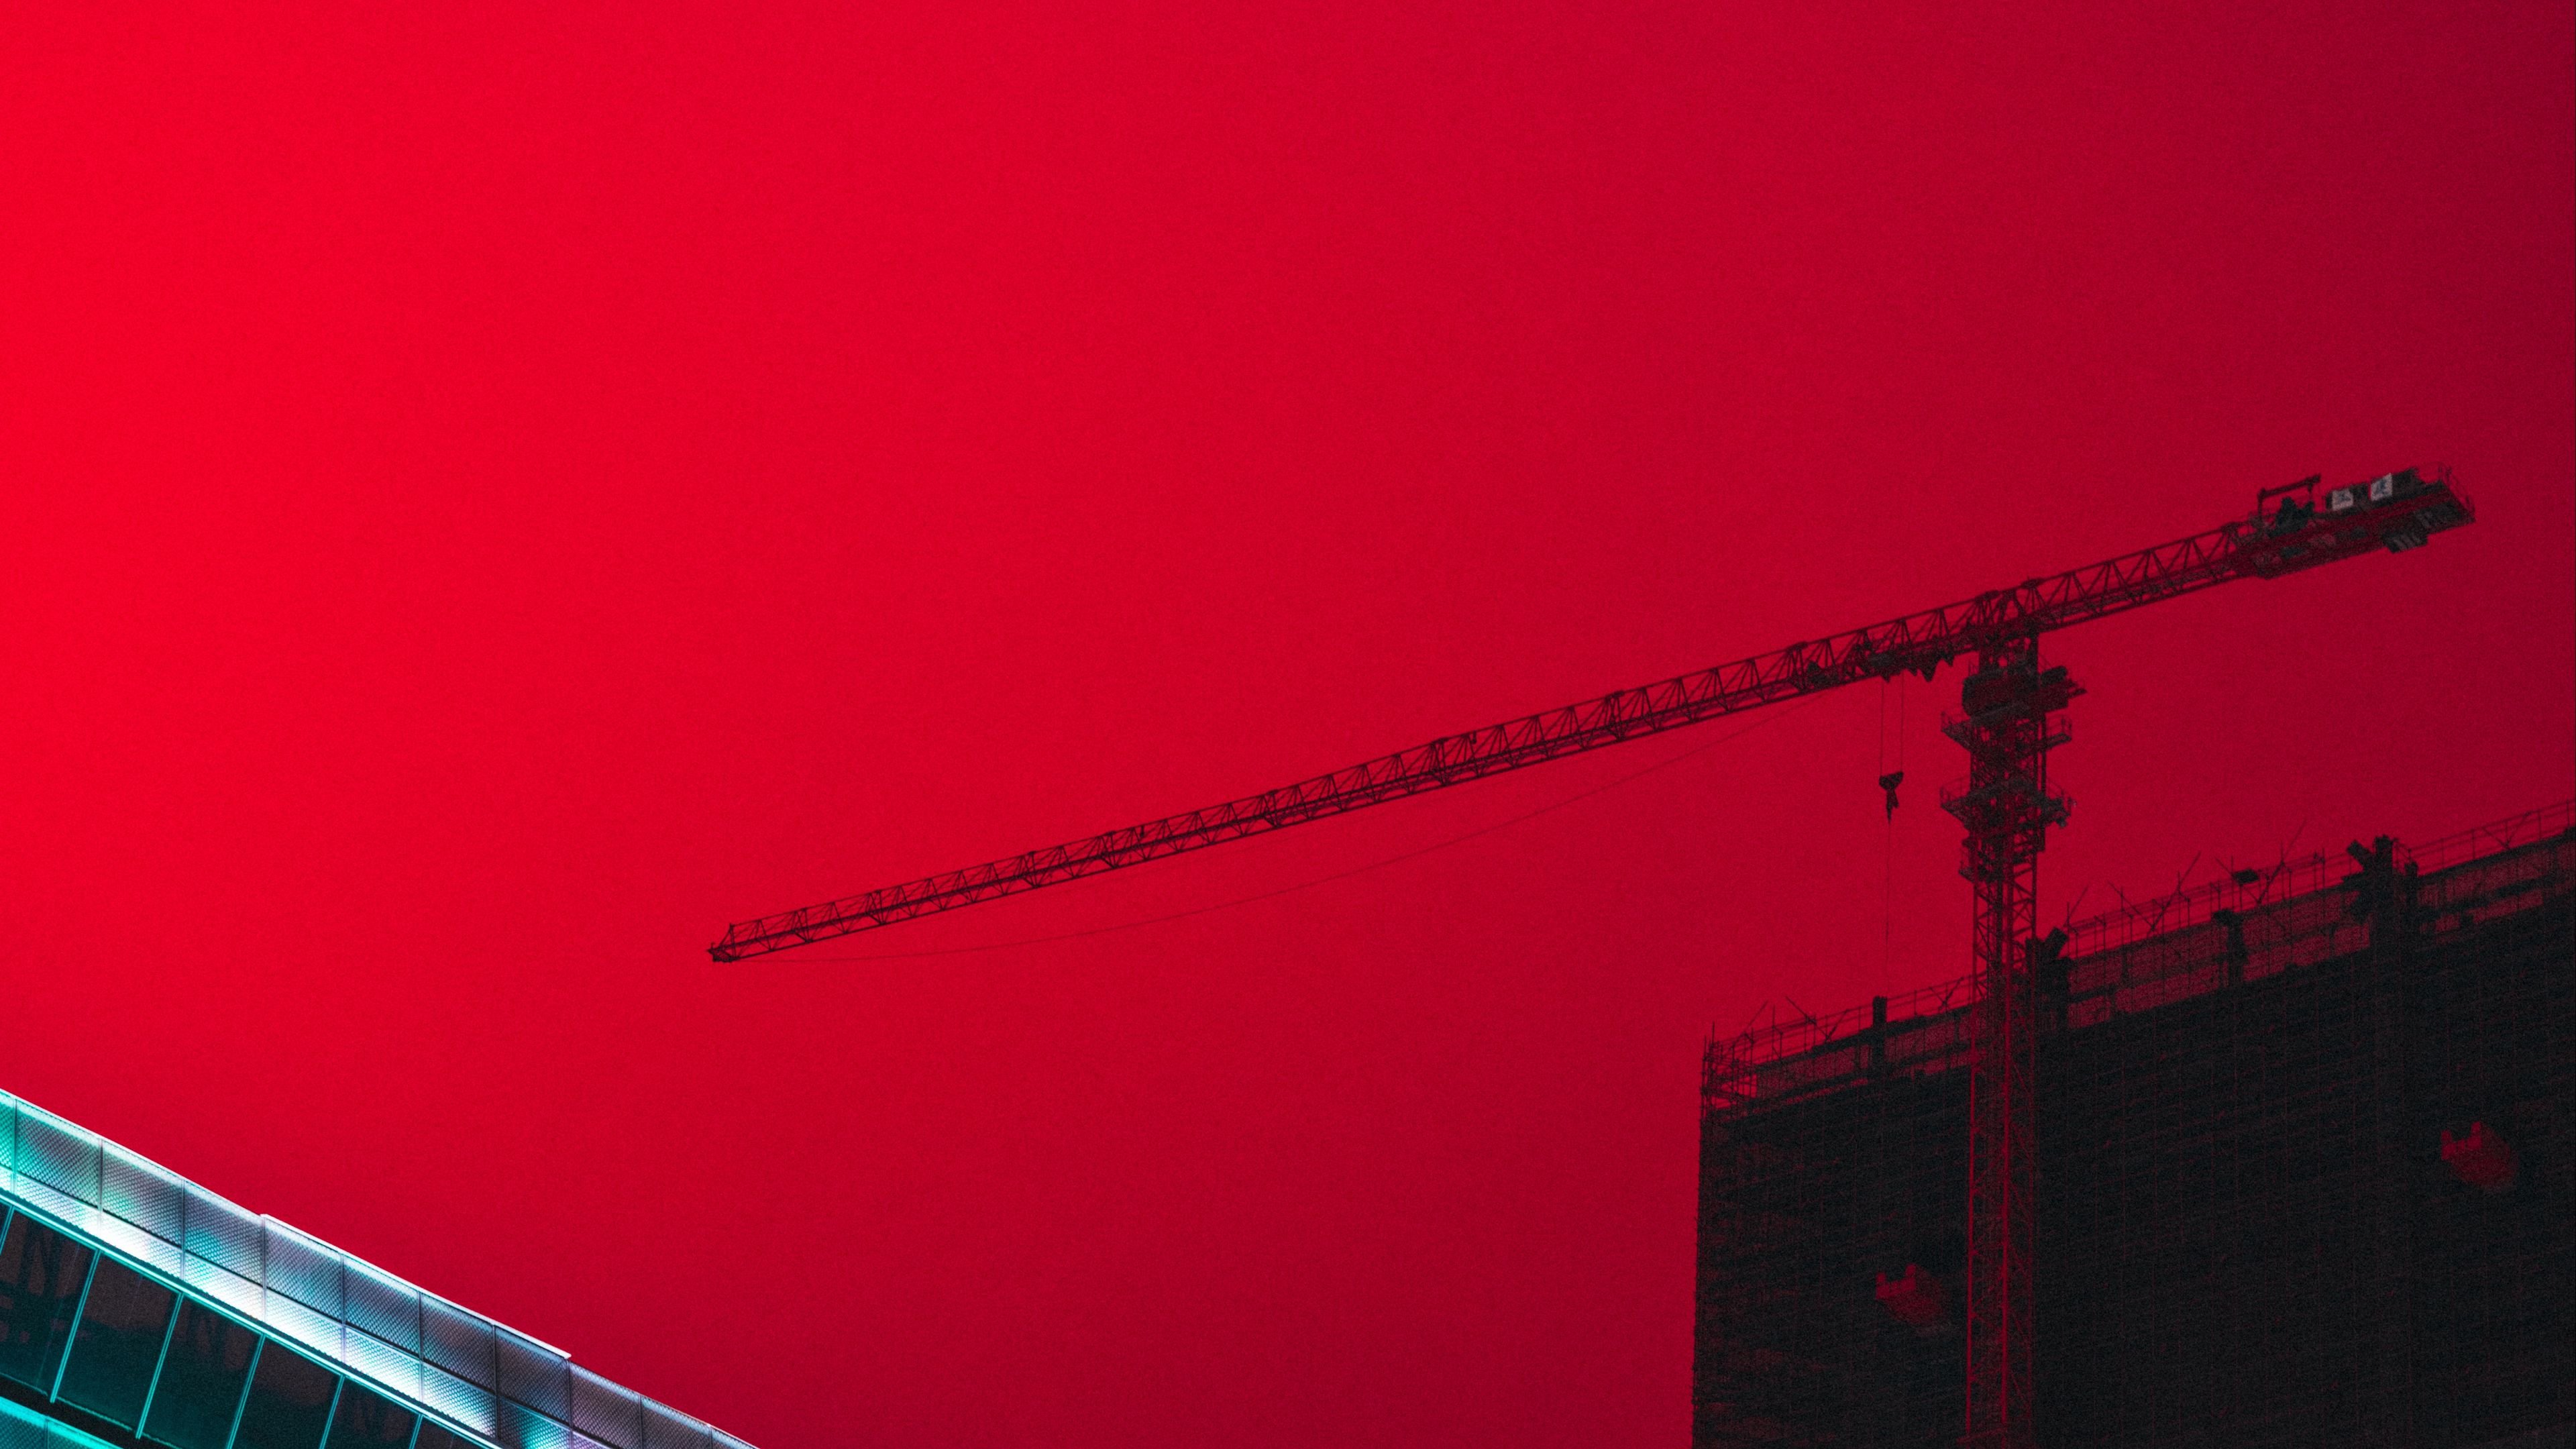 Download wallpaper 3840x2160 building, construction, crane, architecture, city sky, red 4k uhd 16:9 HD background